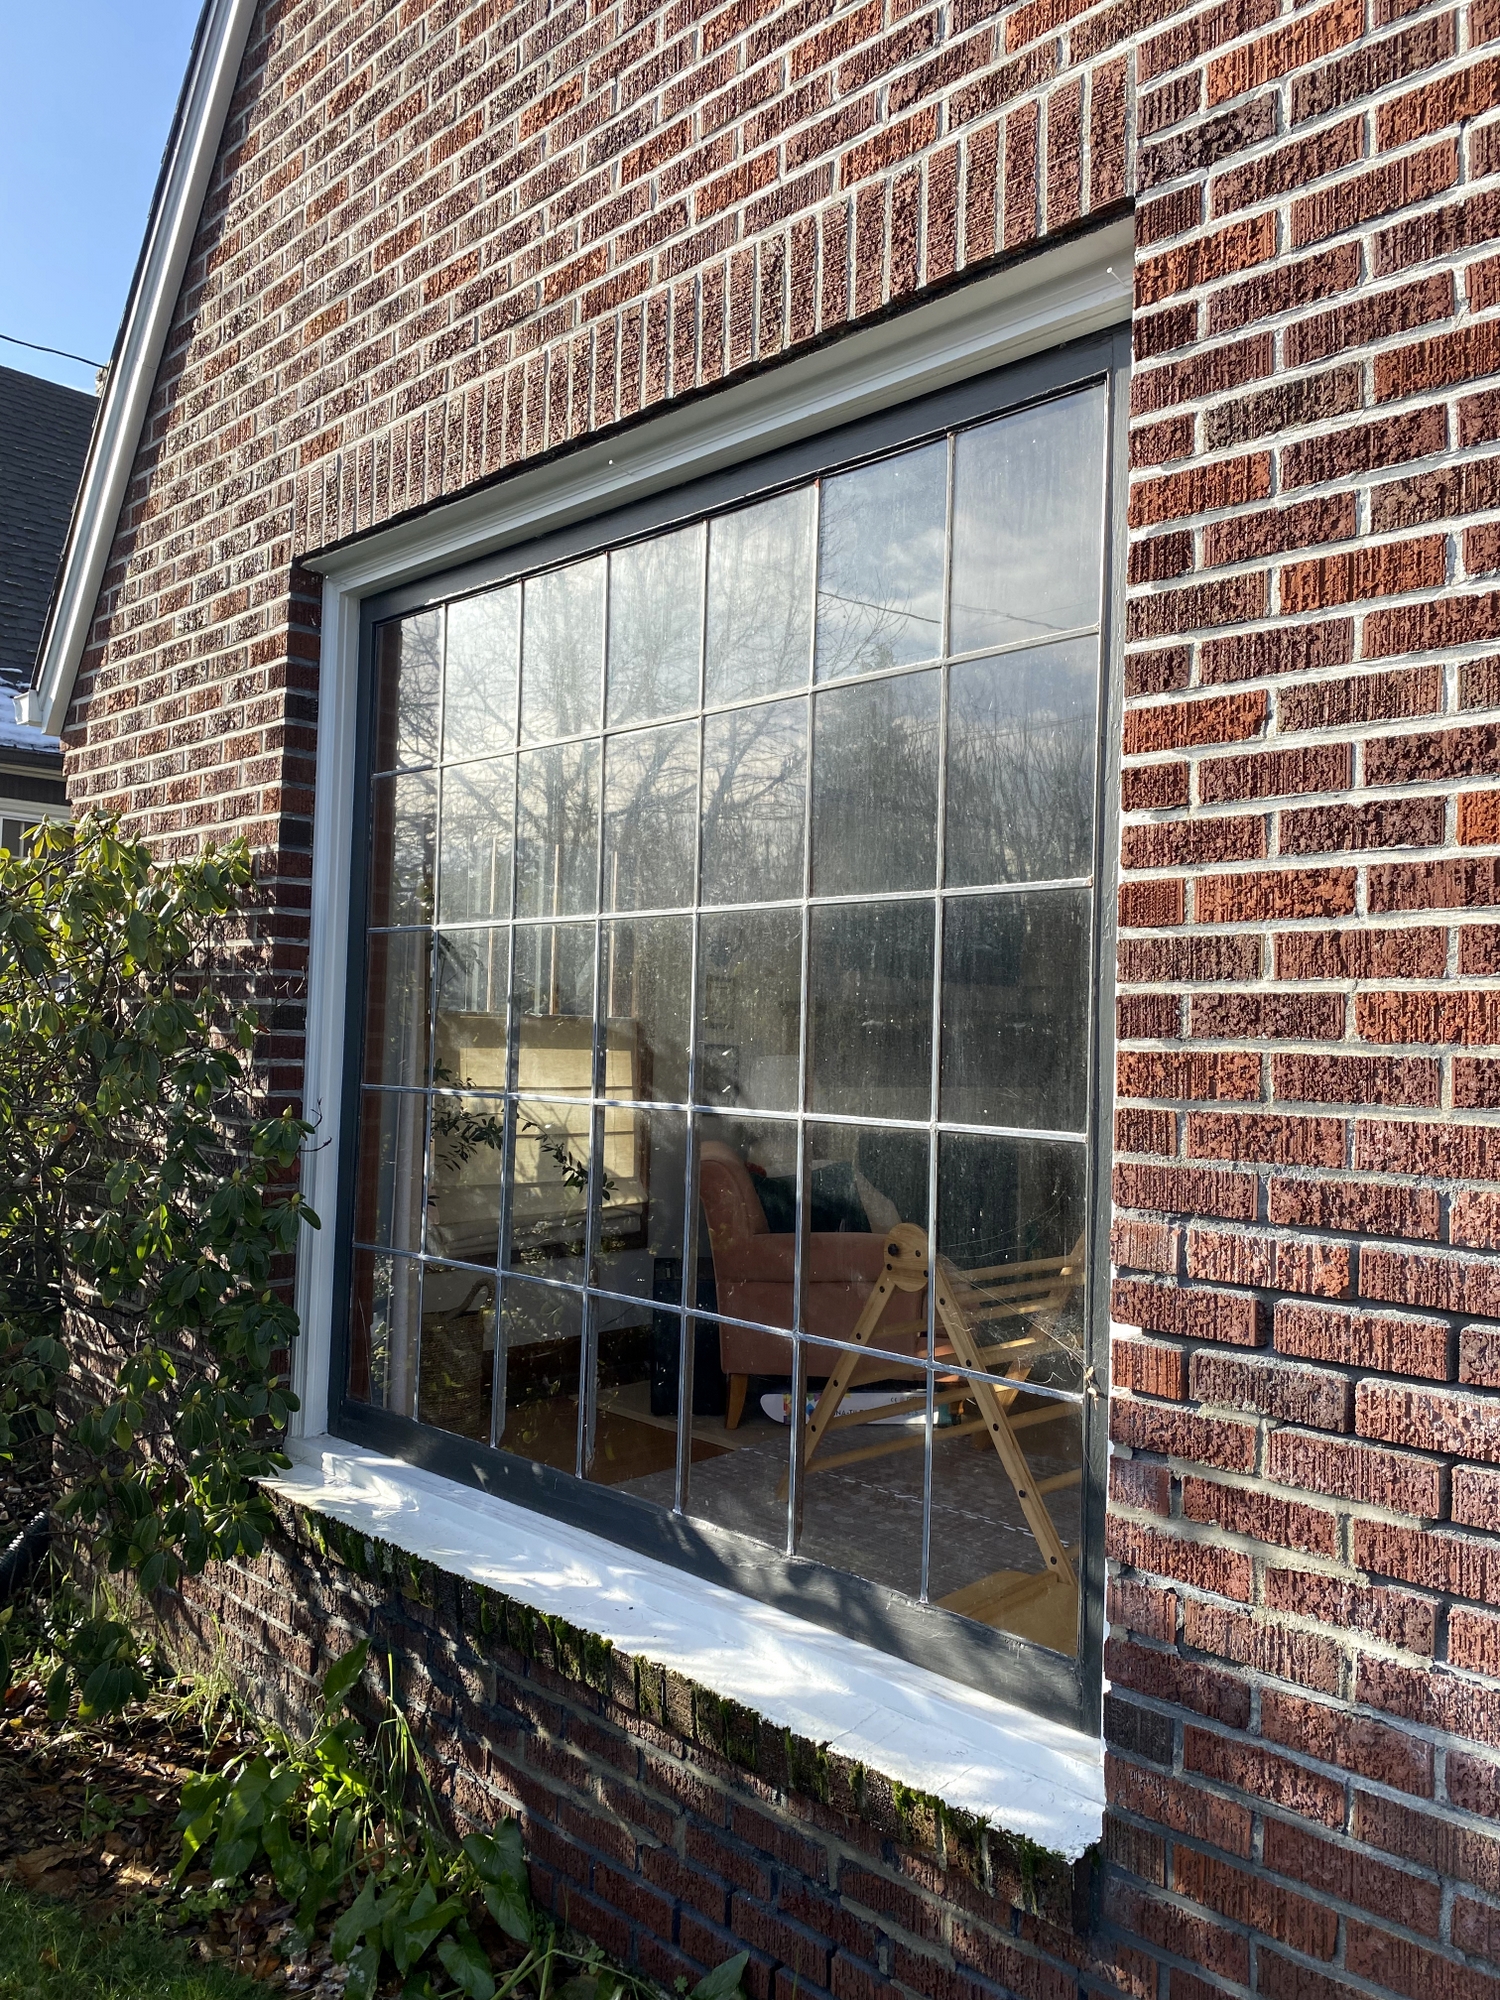 How to Replace a Window Pane - This Old House